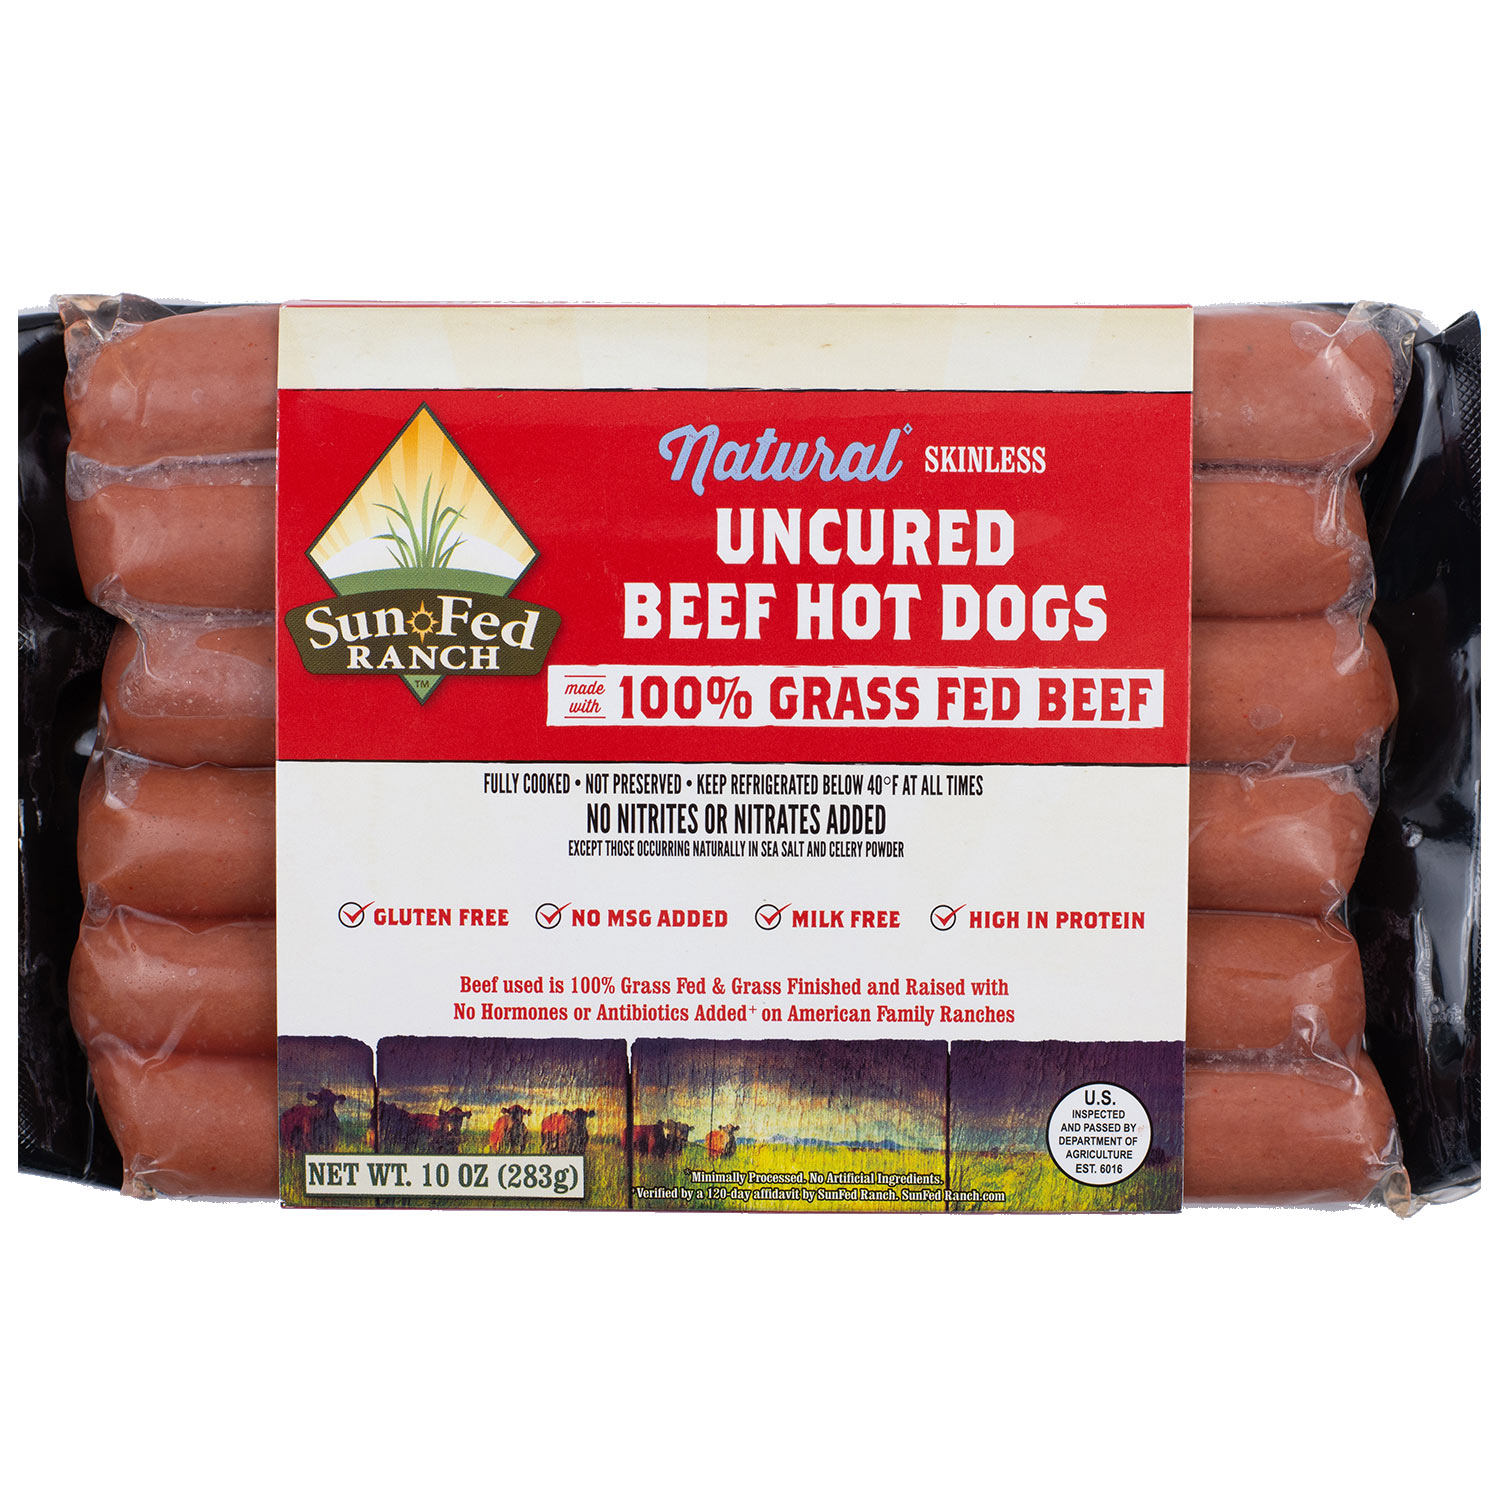 Uncured Beef Hot Dogs